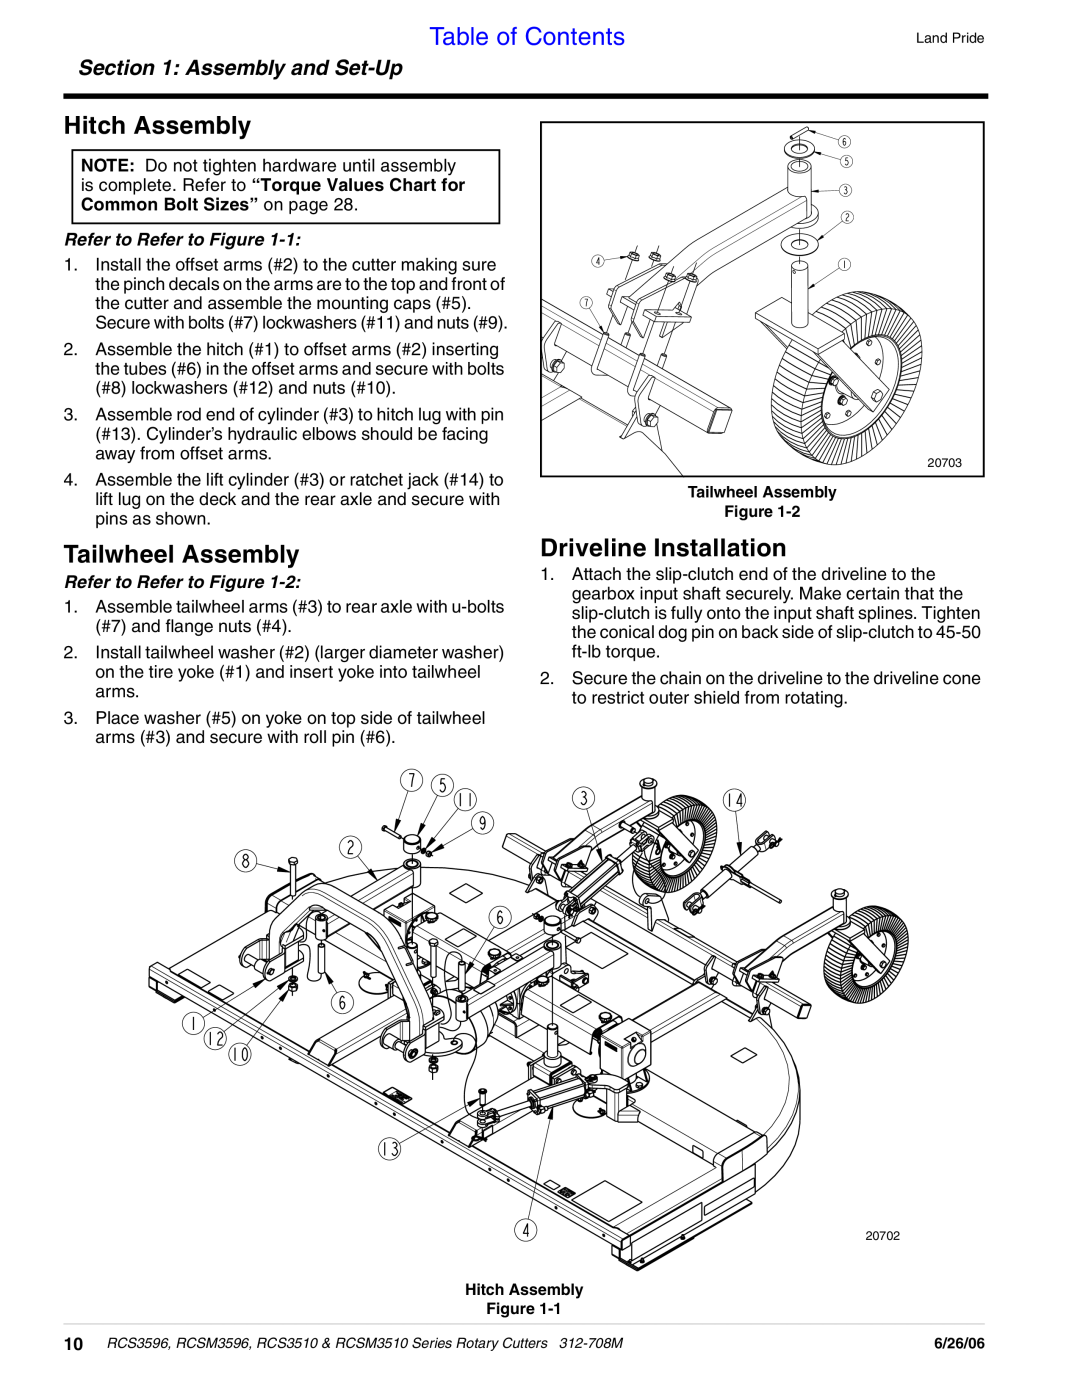 Land Pride RCS3510 Hitch Assembly, Tailwheel Assembly, Driveline Installation, Refer to Refer to Figure, Table of Contents 